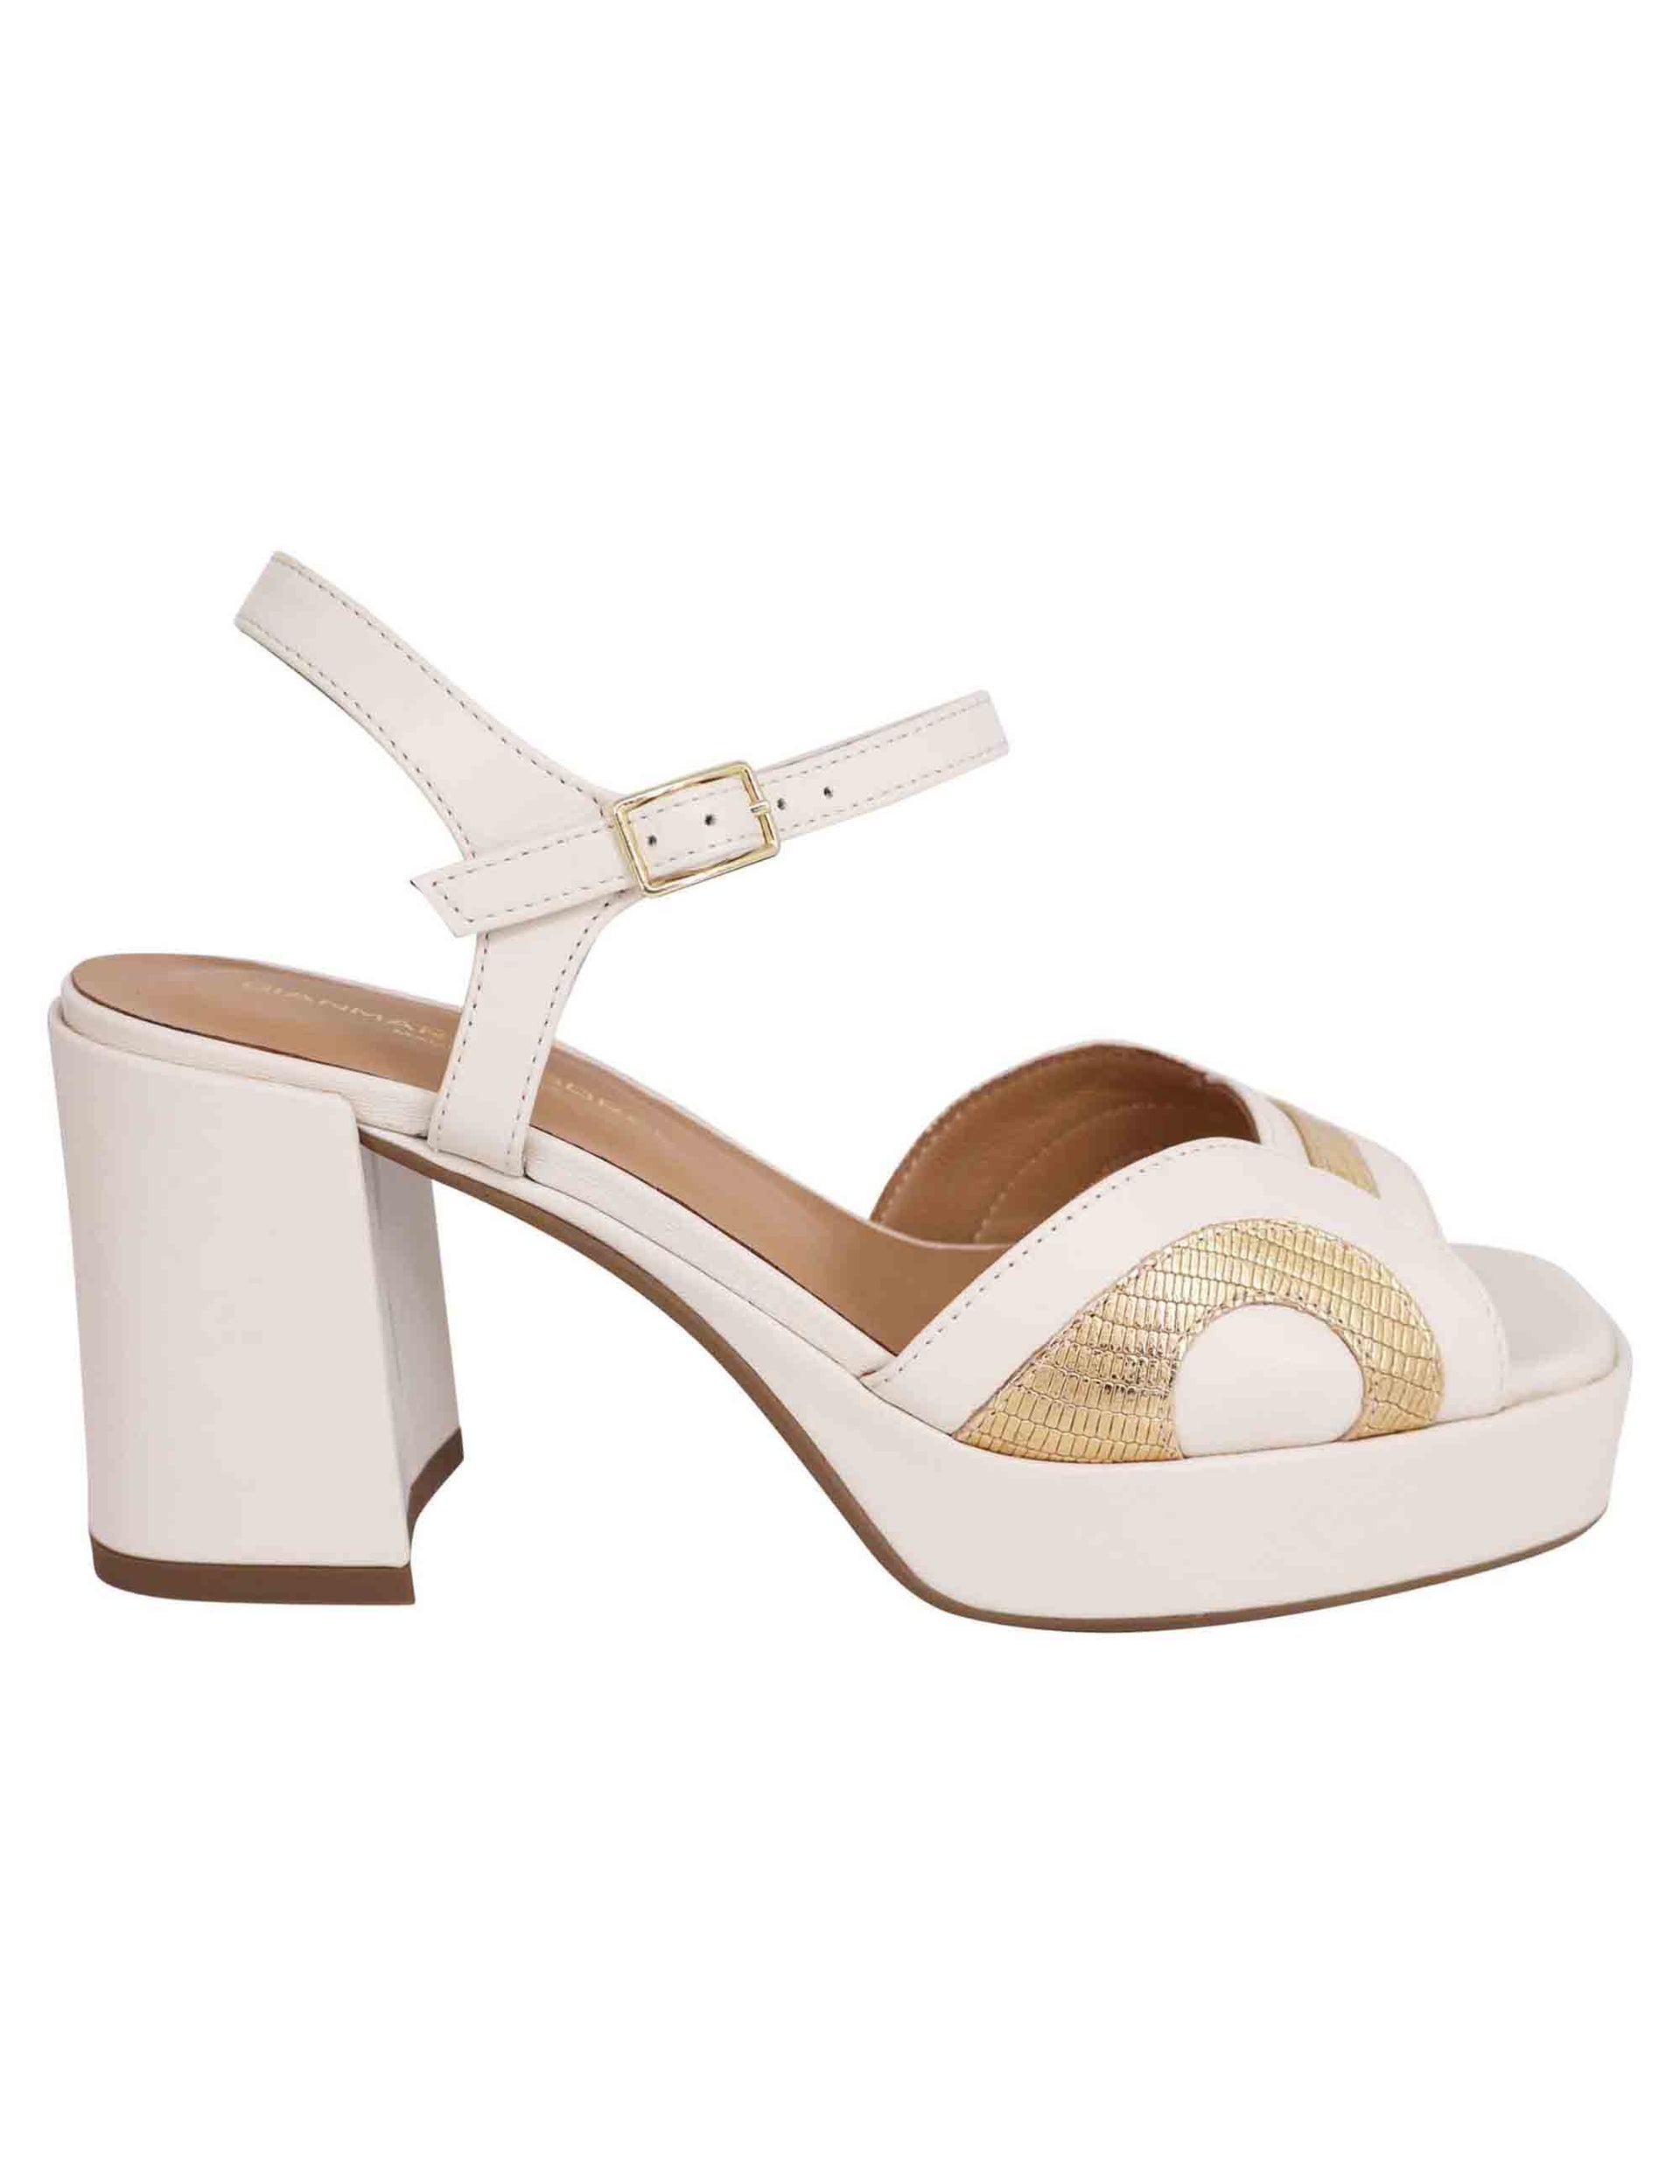 Women's white leather sandals with ankle strap, heel and plateau